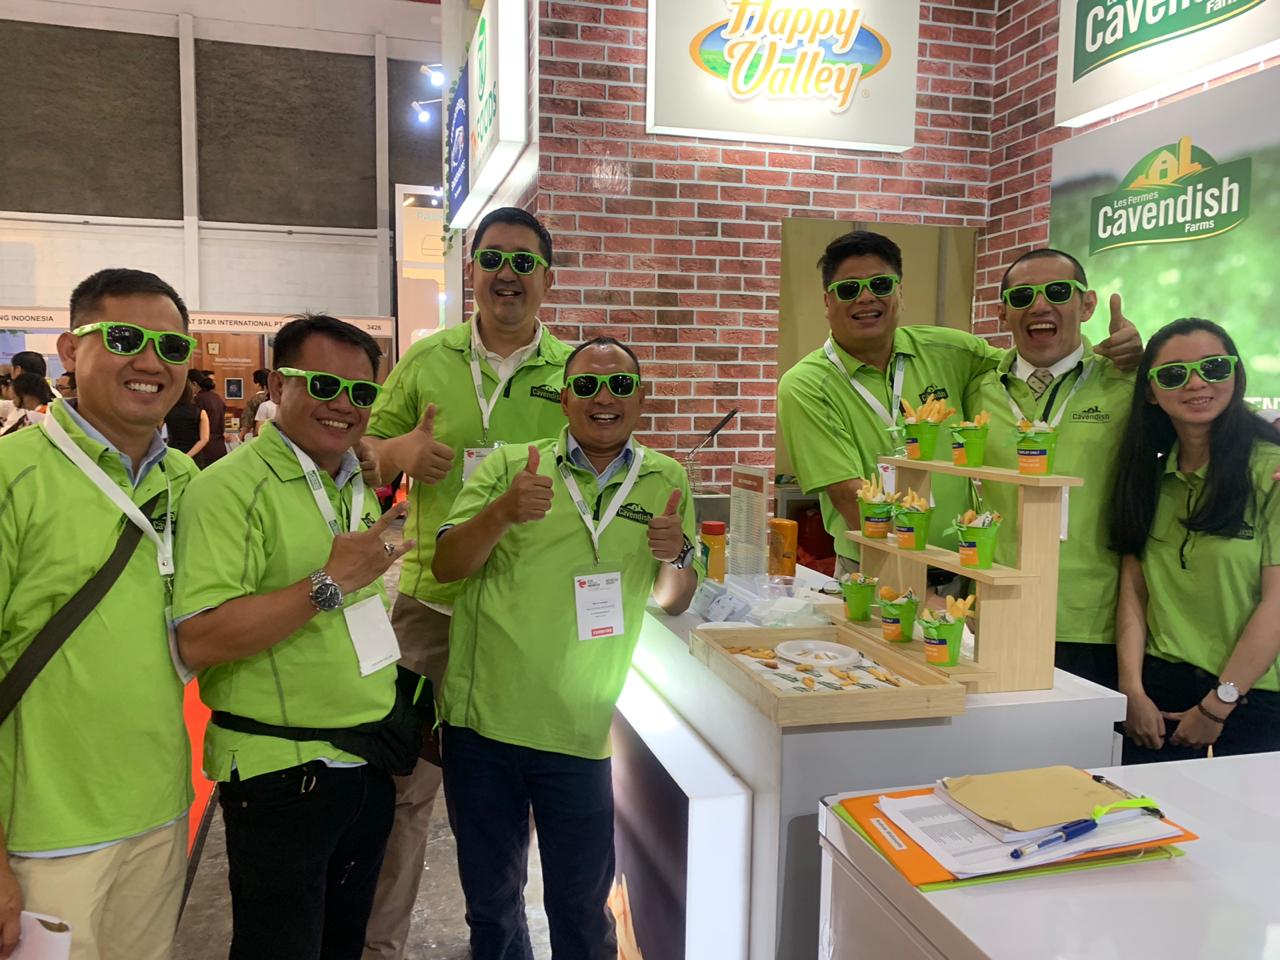 Cavendish Farms representatives at the Jakarta International Expo in Indonesia